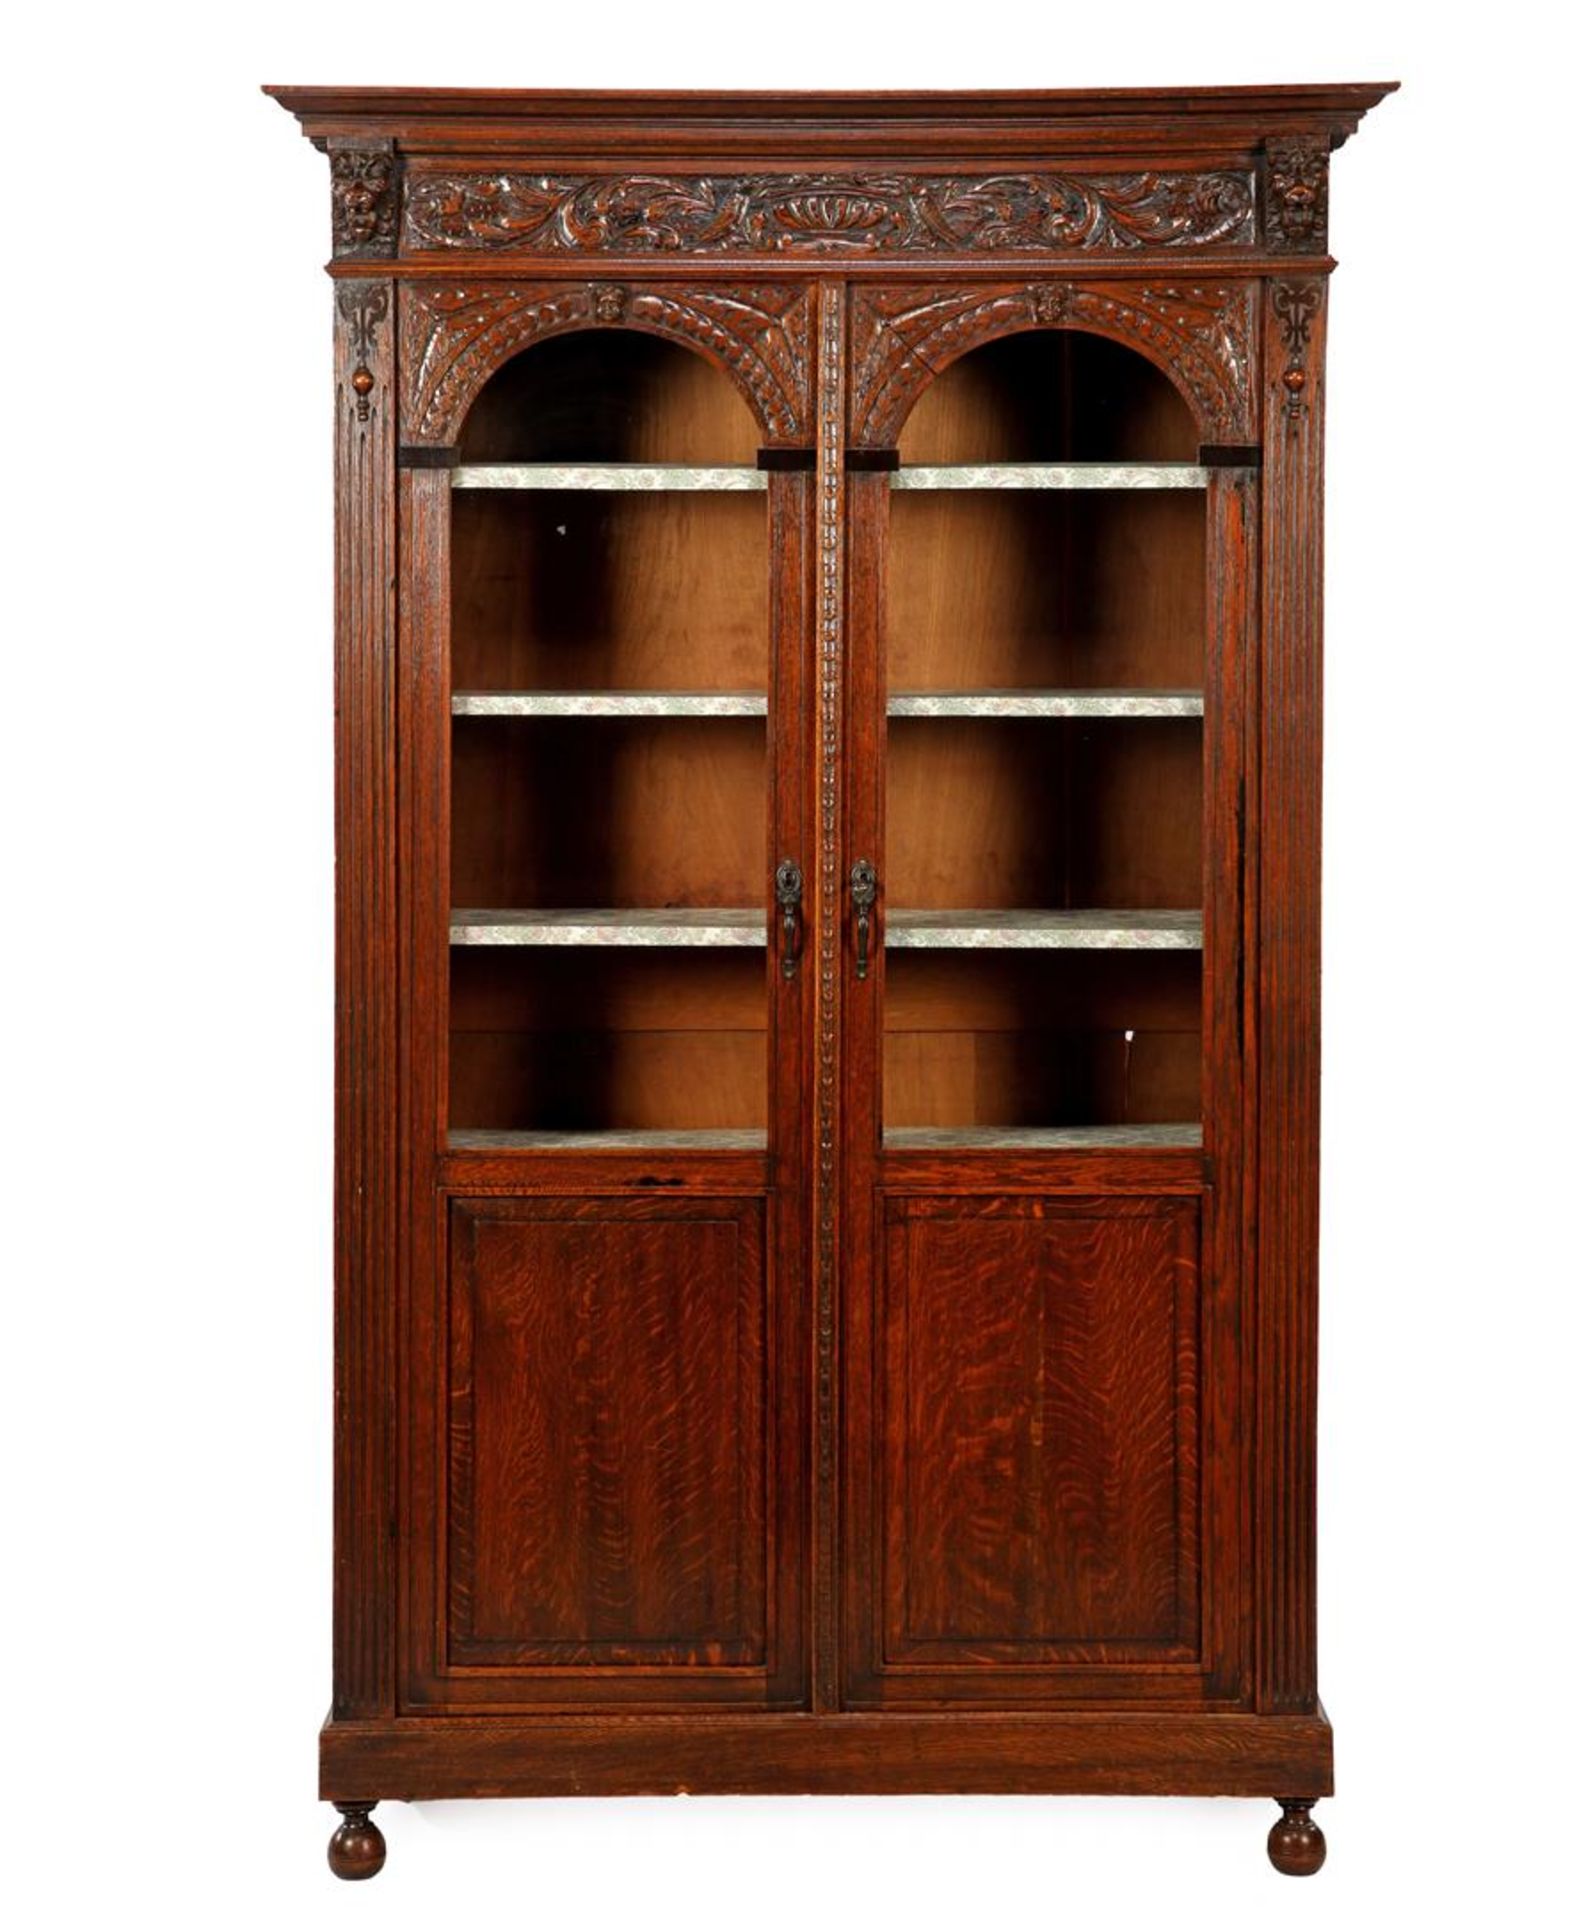 Oak fired display cabinet with straight hood rail, among others. lion heads